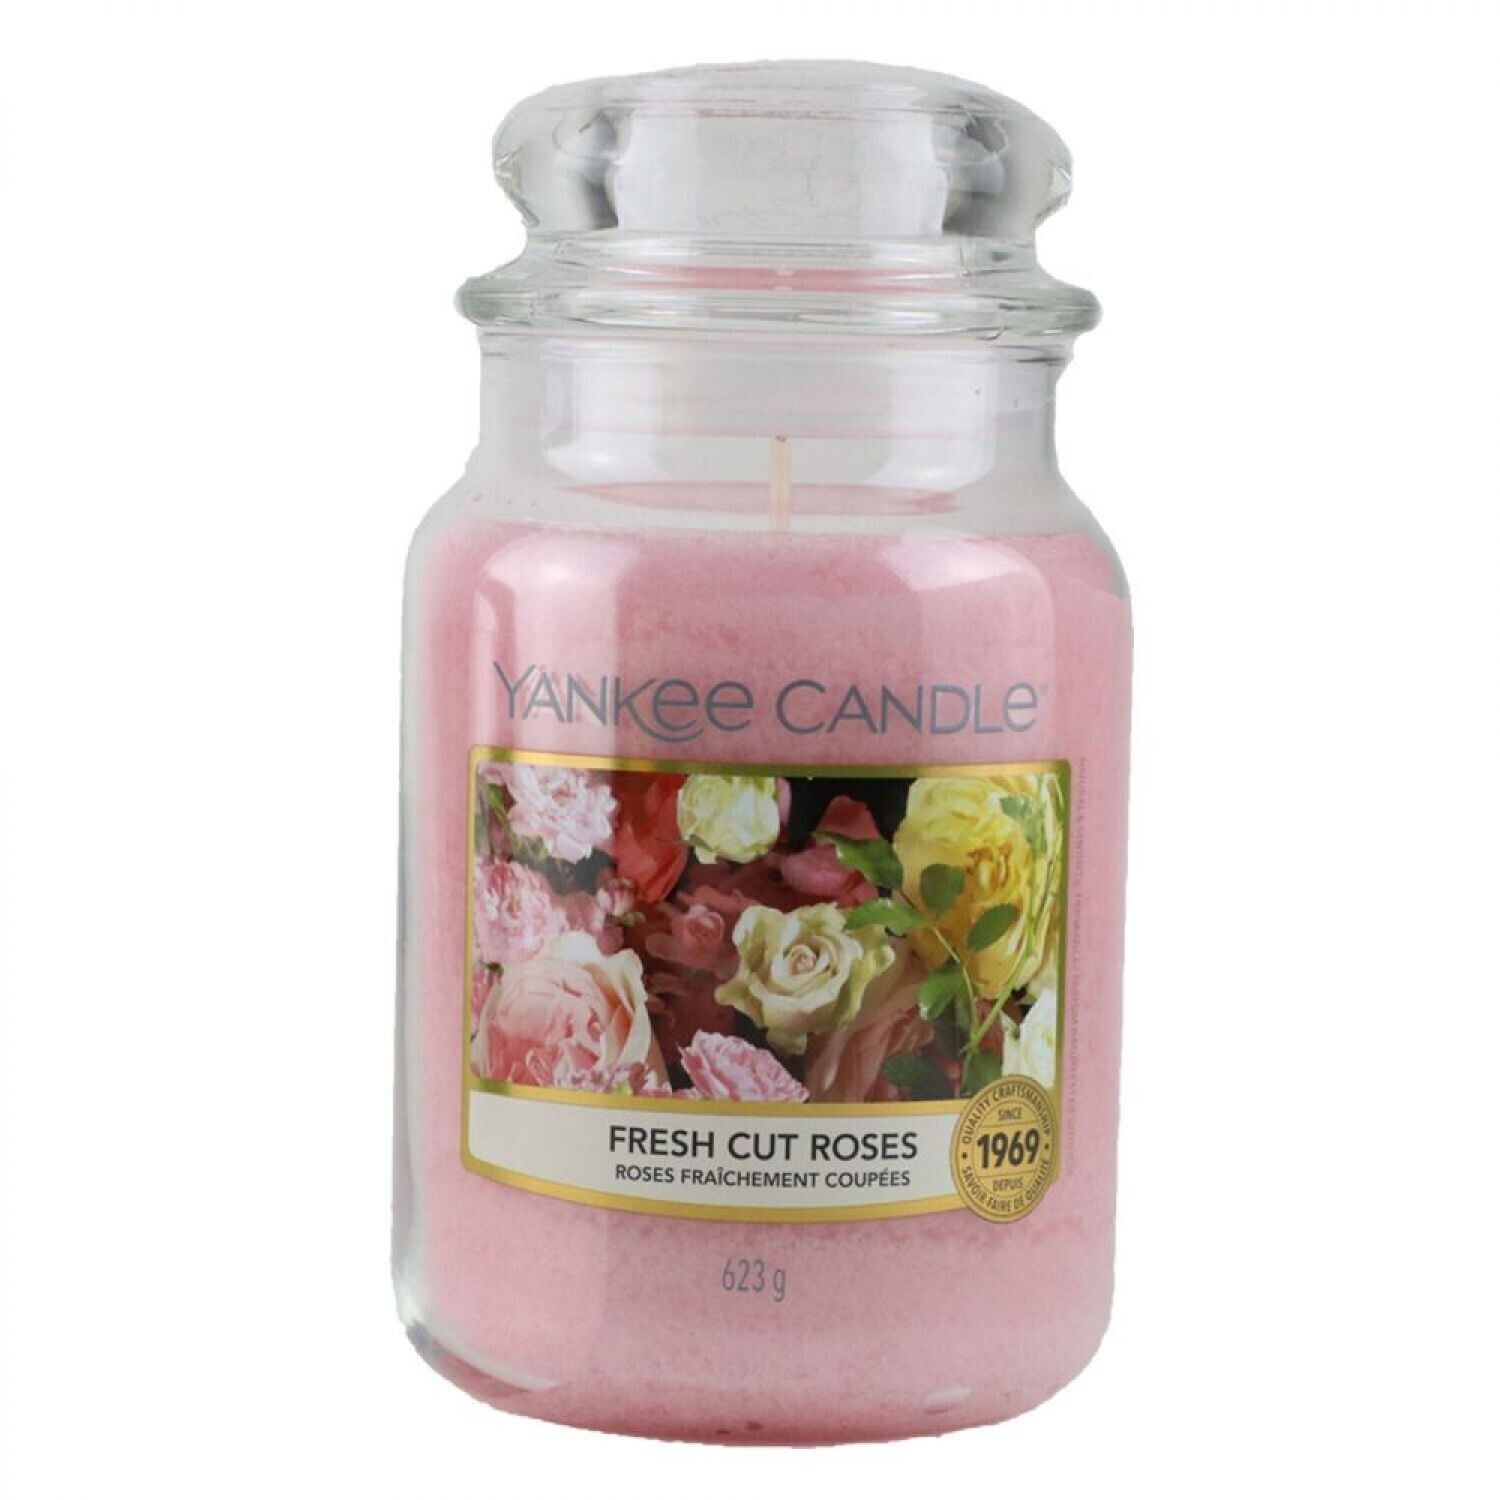 Yankee Candle Clean Cotton Kerze ab 1,69 €